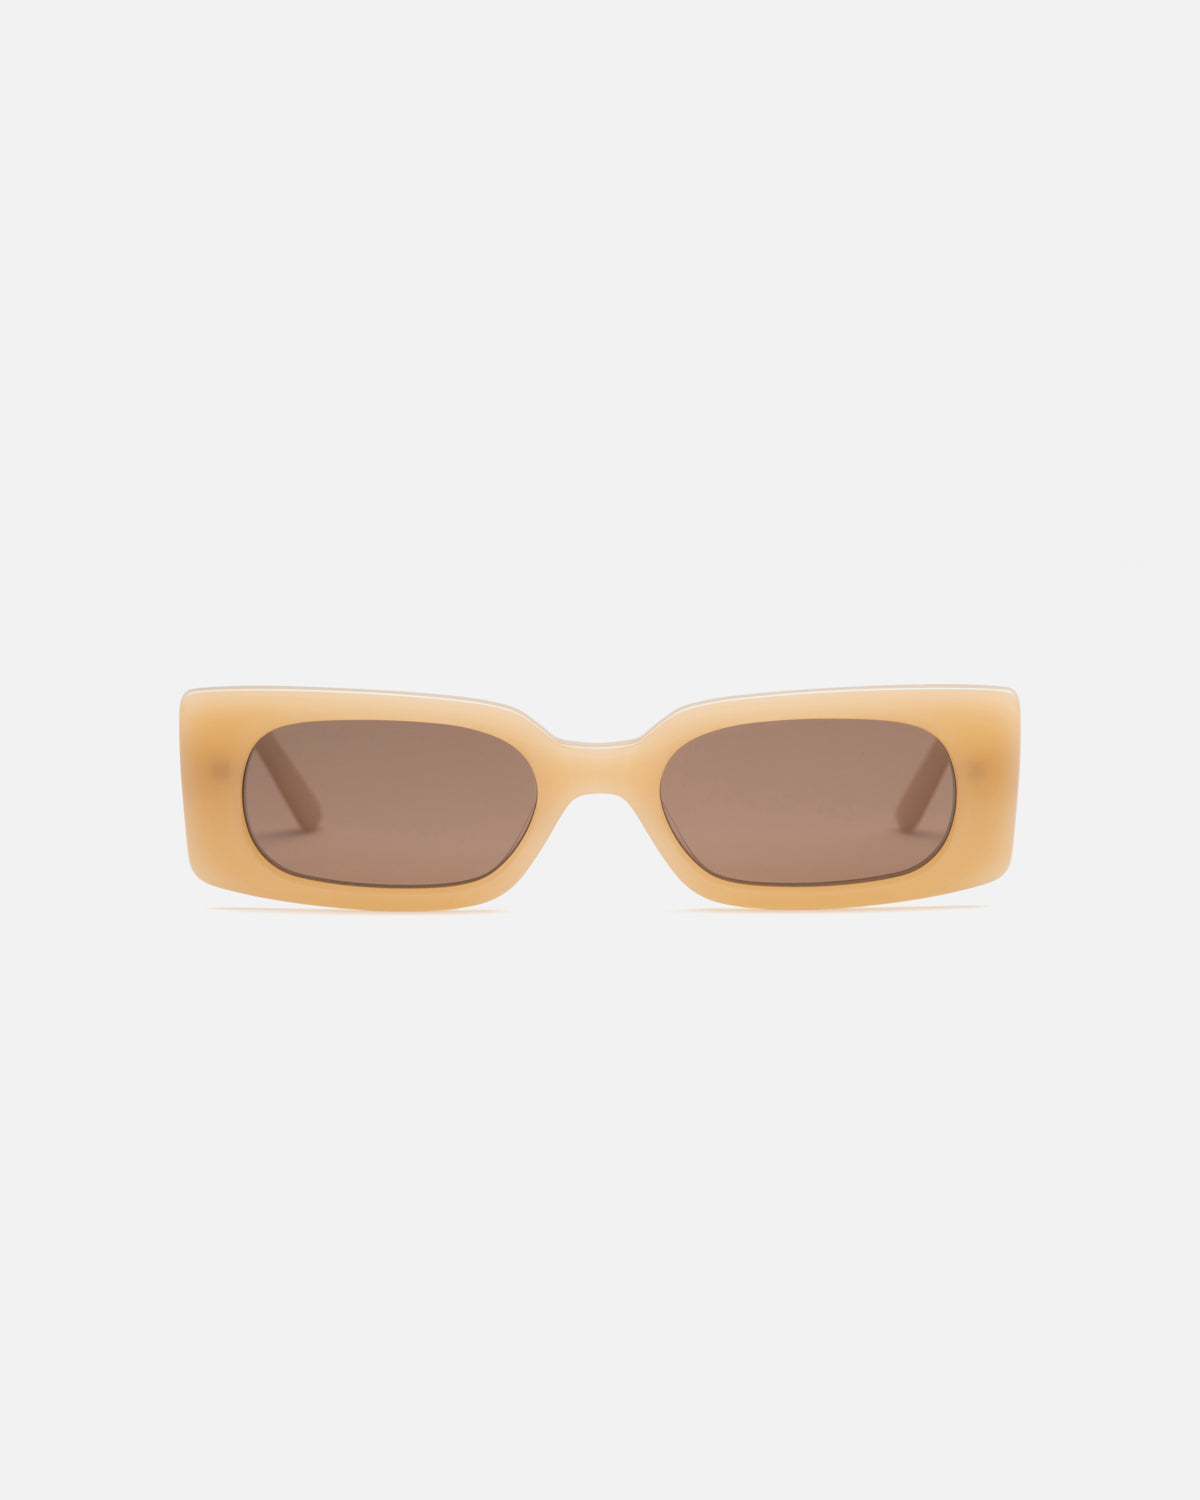 Lu Goldie Salome rectangle Sunglasses in yellow acetate with brown lenses, front